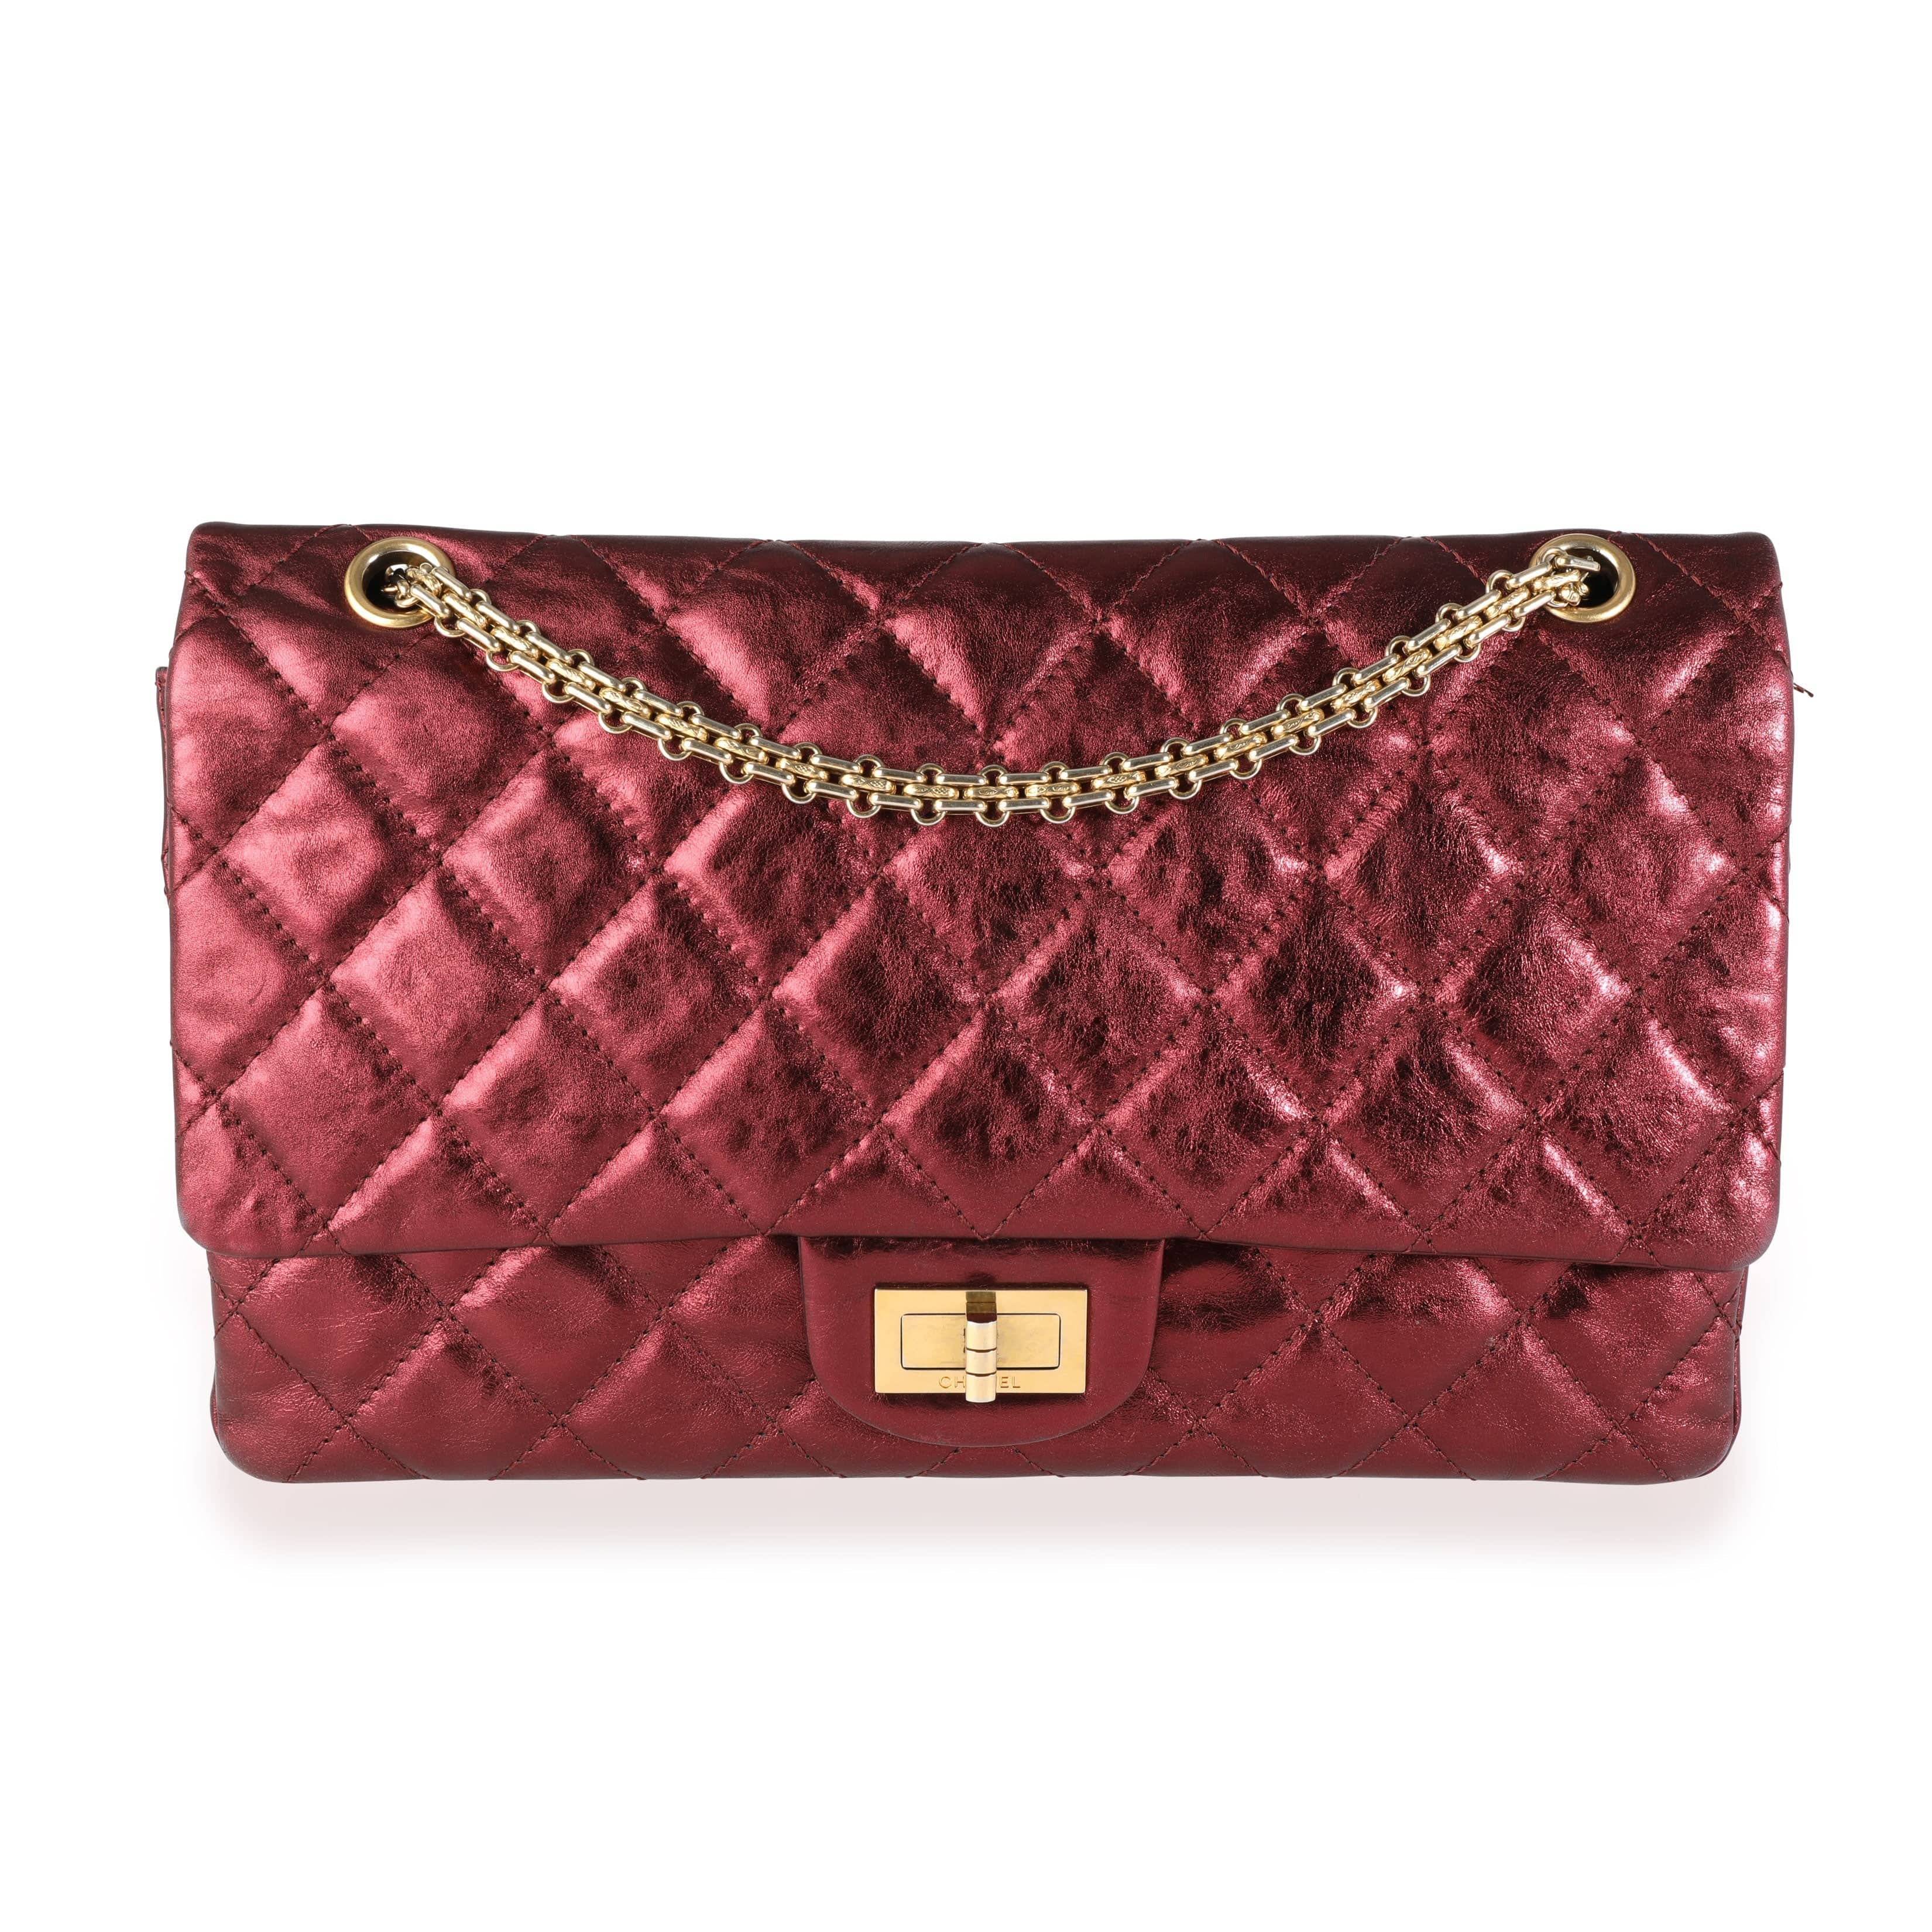 Chanel Chanel Metallic Burgundy Quilted Calfskin Reissue 2.55 227 Double Flap Bag